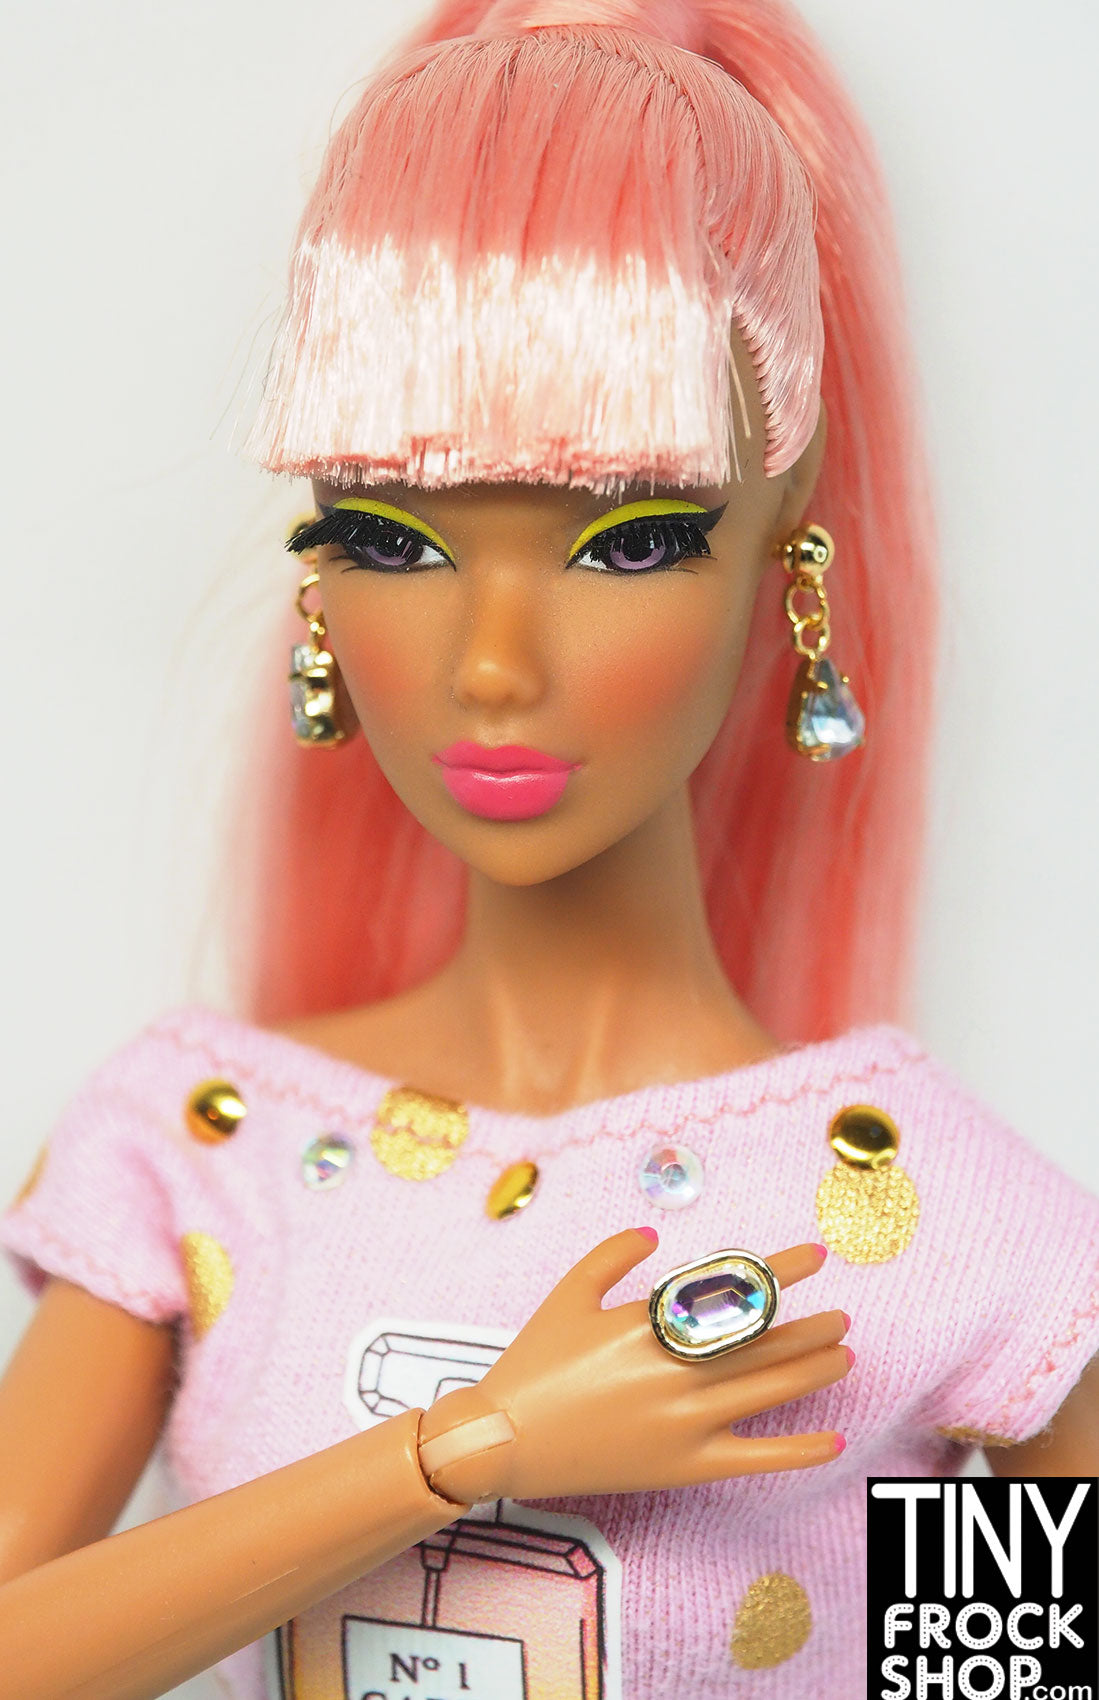 Flyvningen tjære Athletic Tiny Frock Shop Integrity A Dolls Life Vanessa AB Rhinestone Drop Earrings  and Ring Set